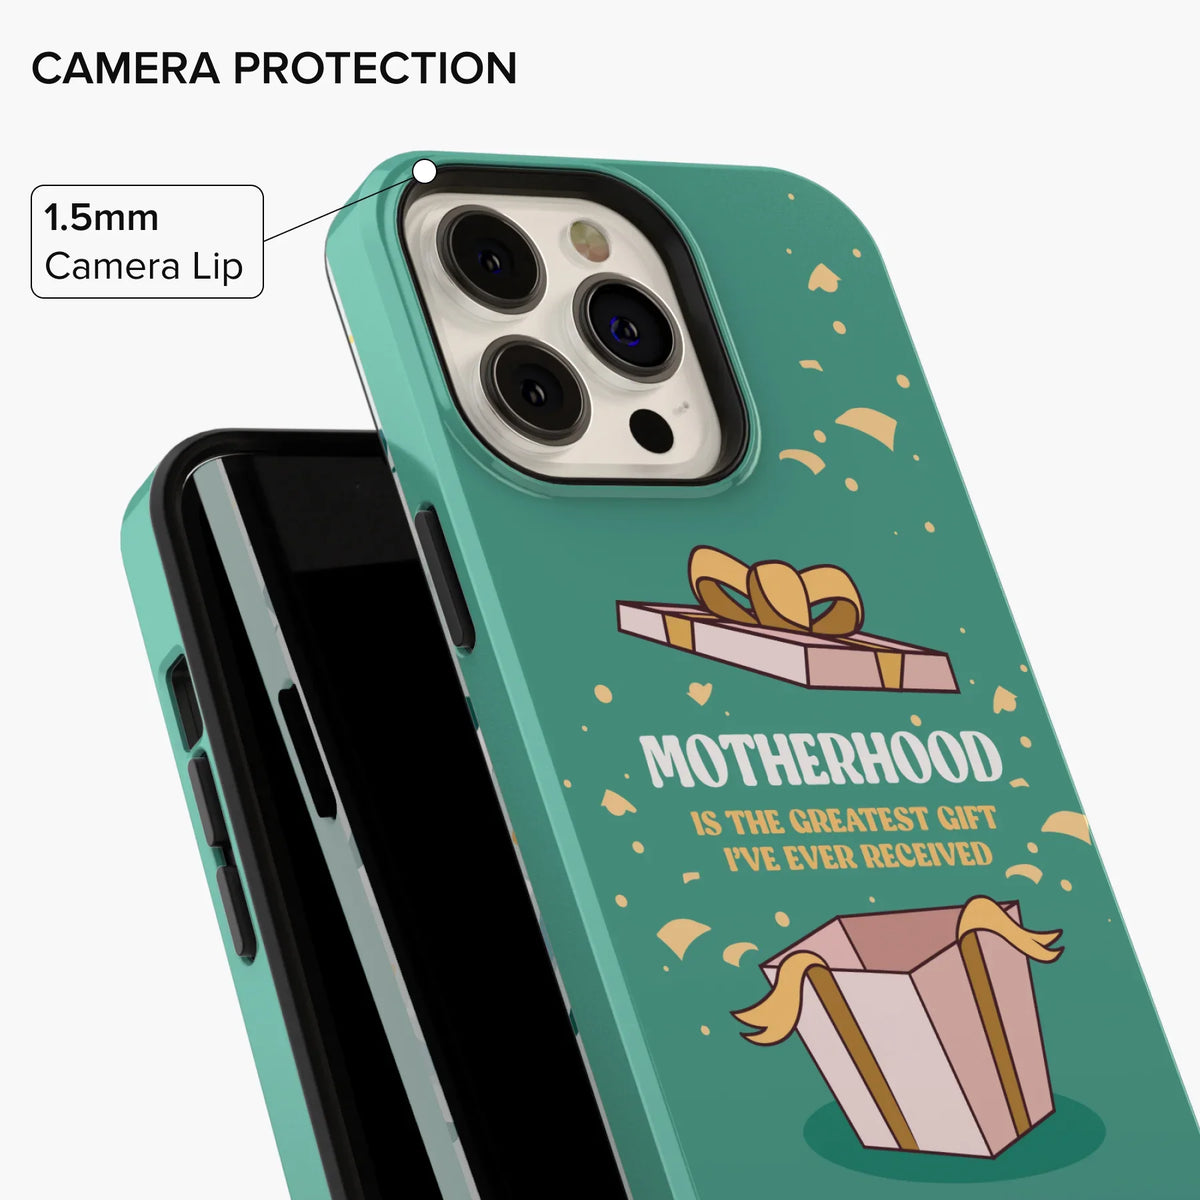 Motherhood Is The Greatest Gift iPhone Case - iPhone 11 Pro Max